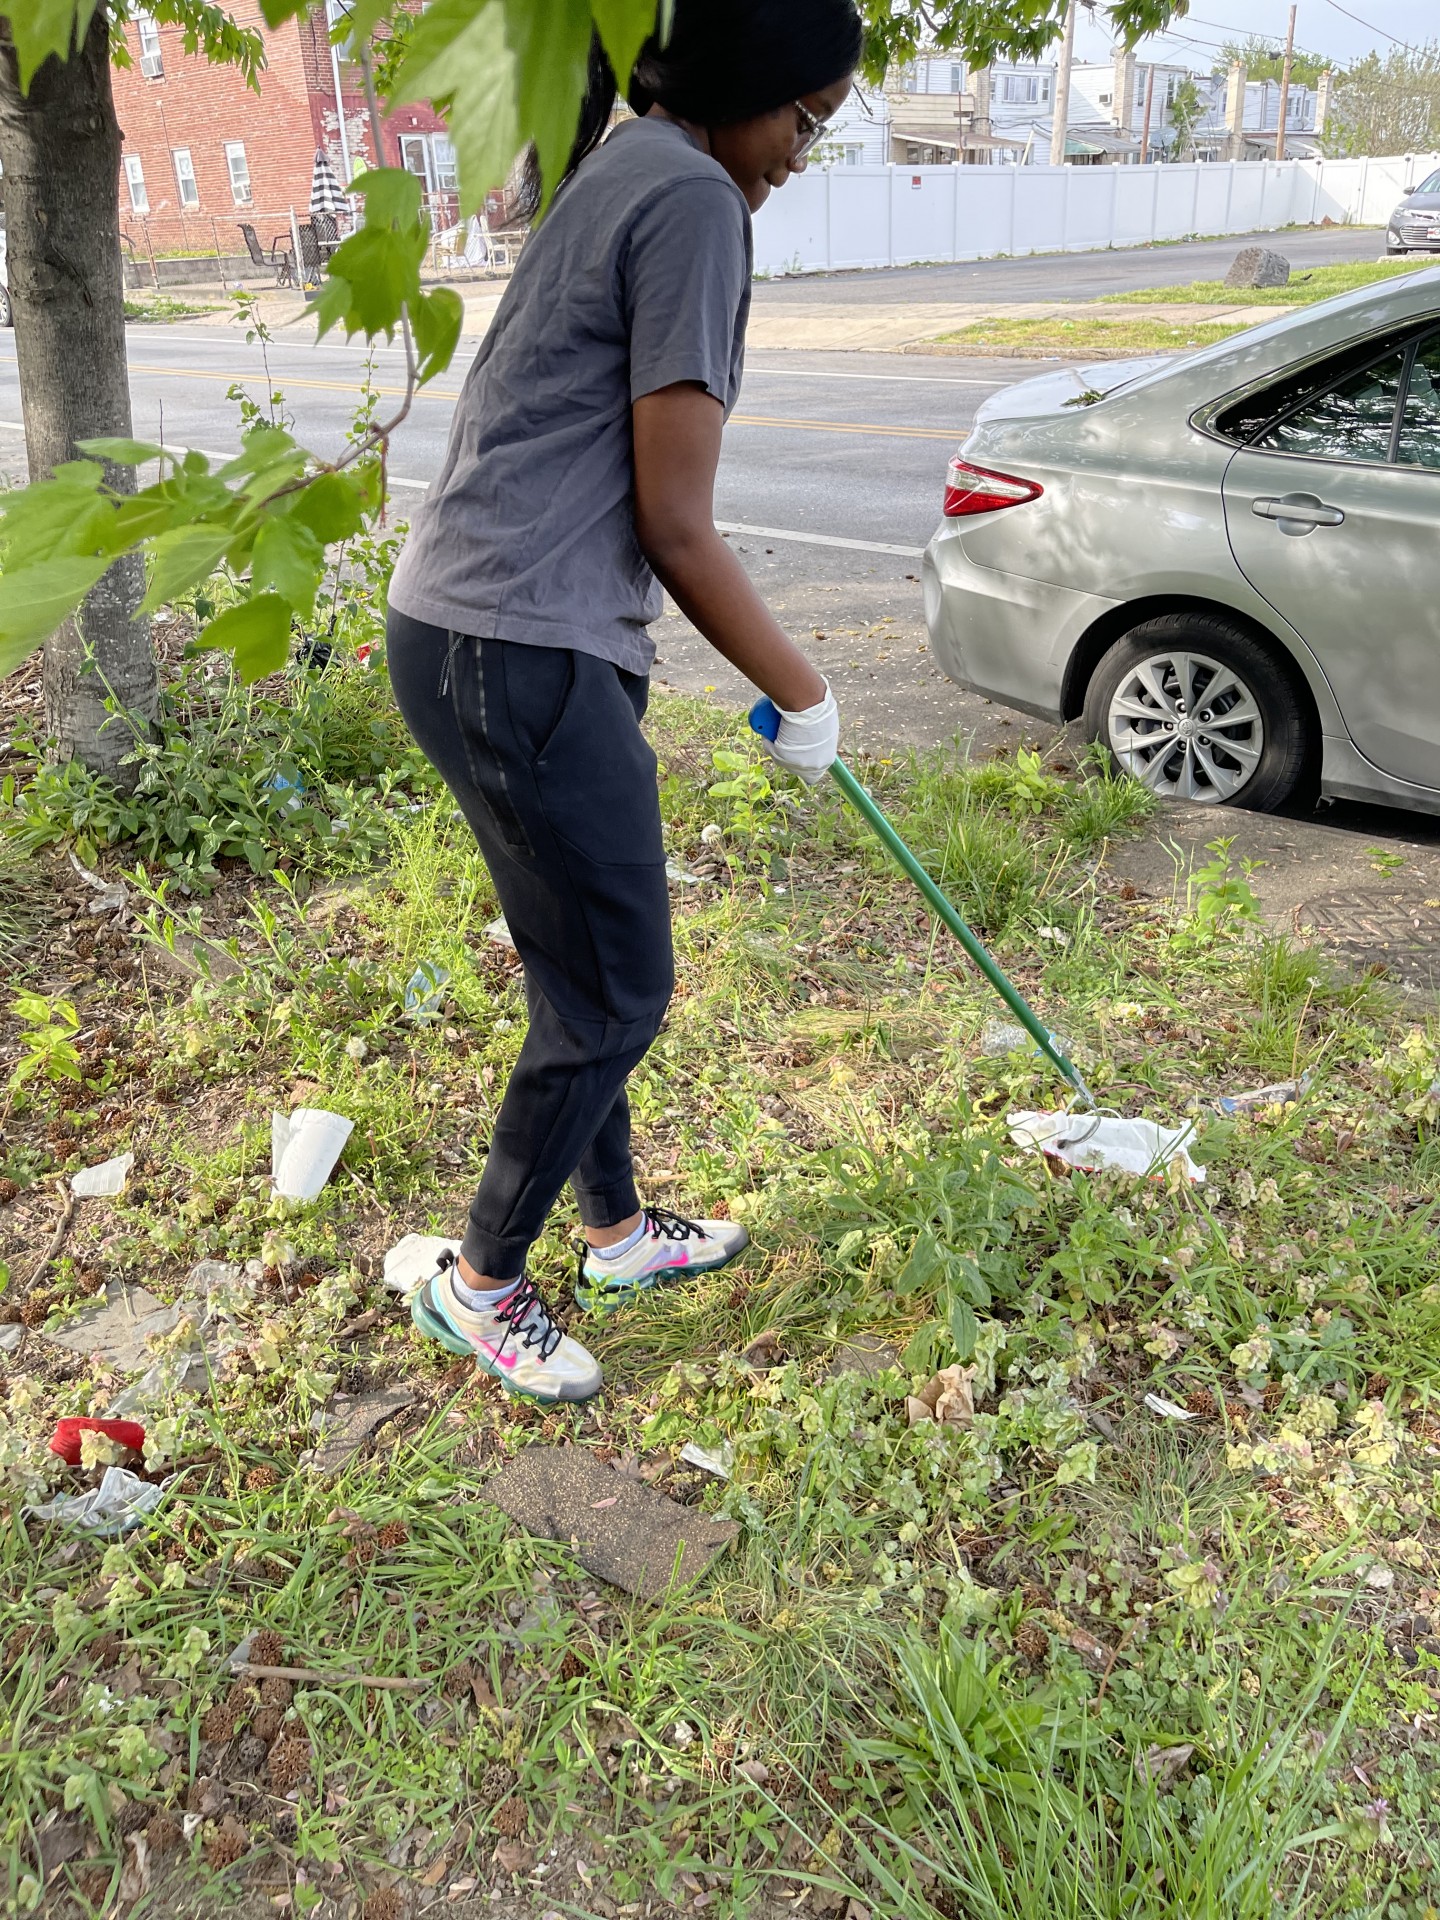 One example of how dirty the area was and I’m shown picking up the trash